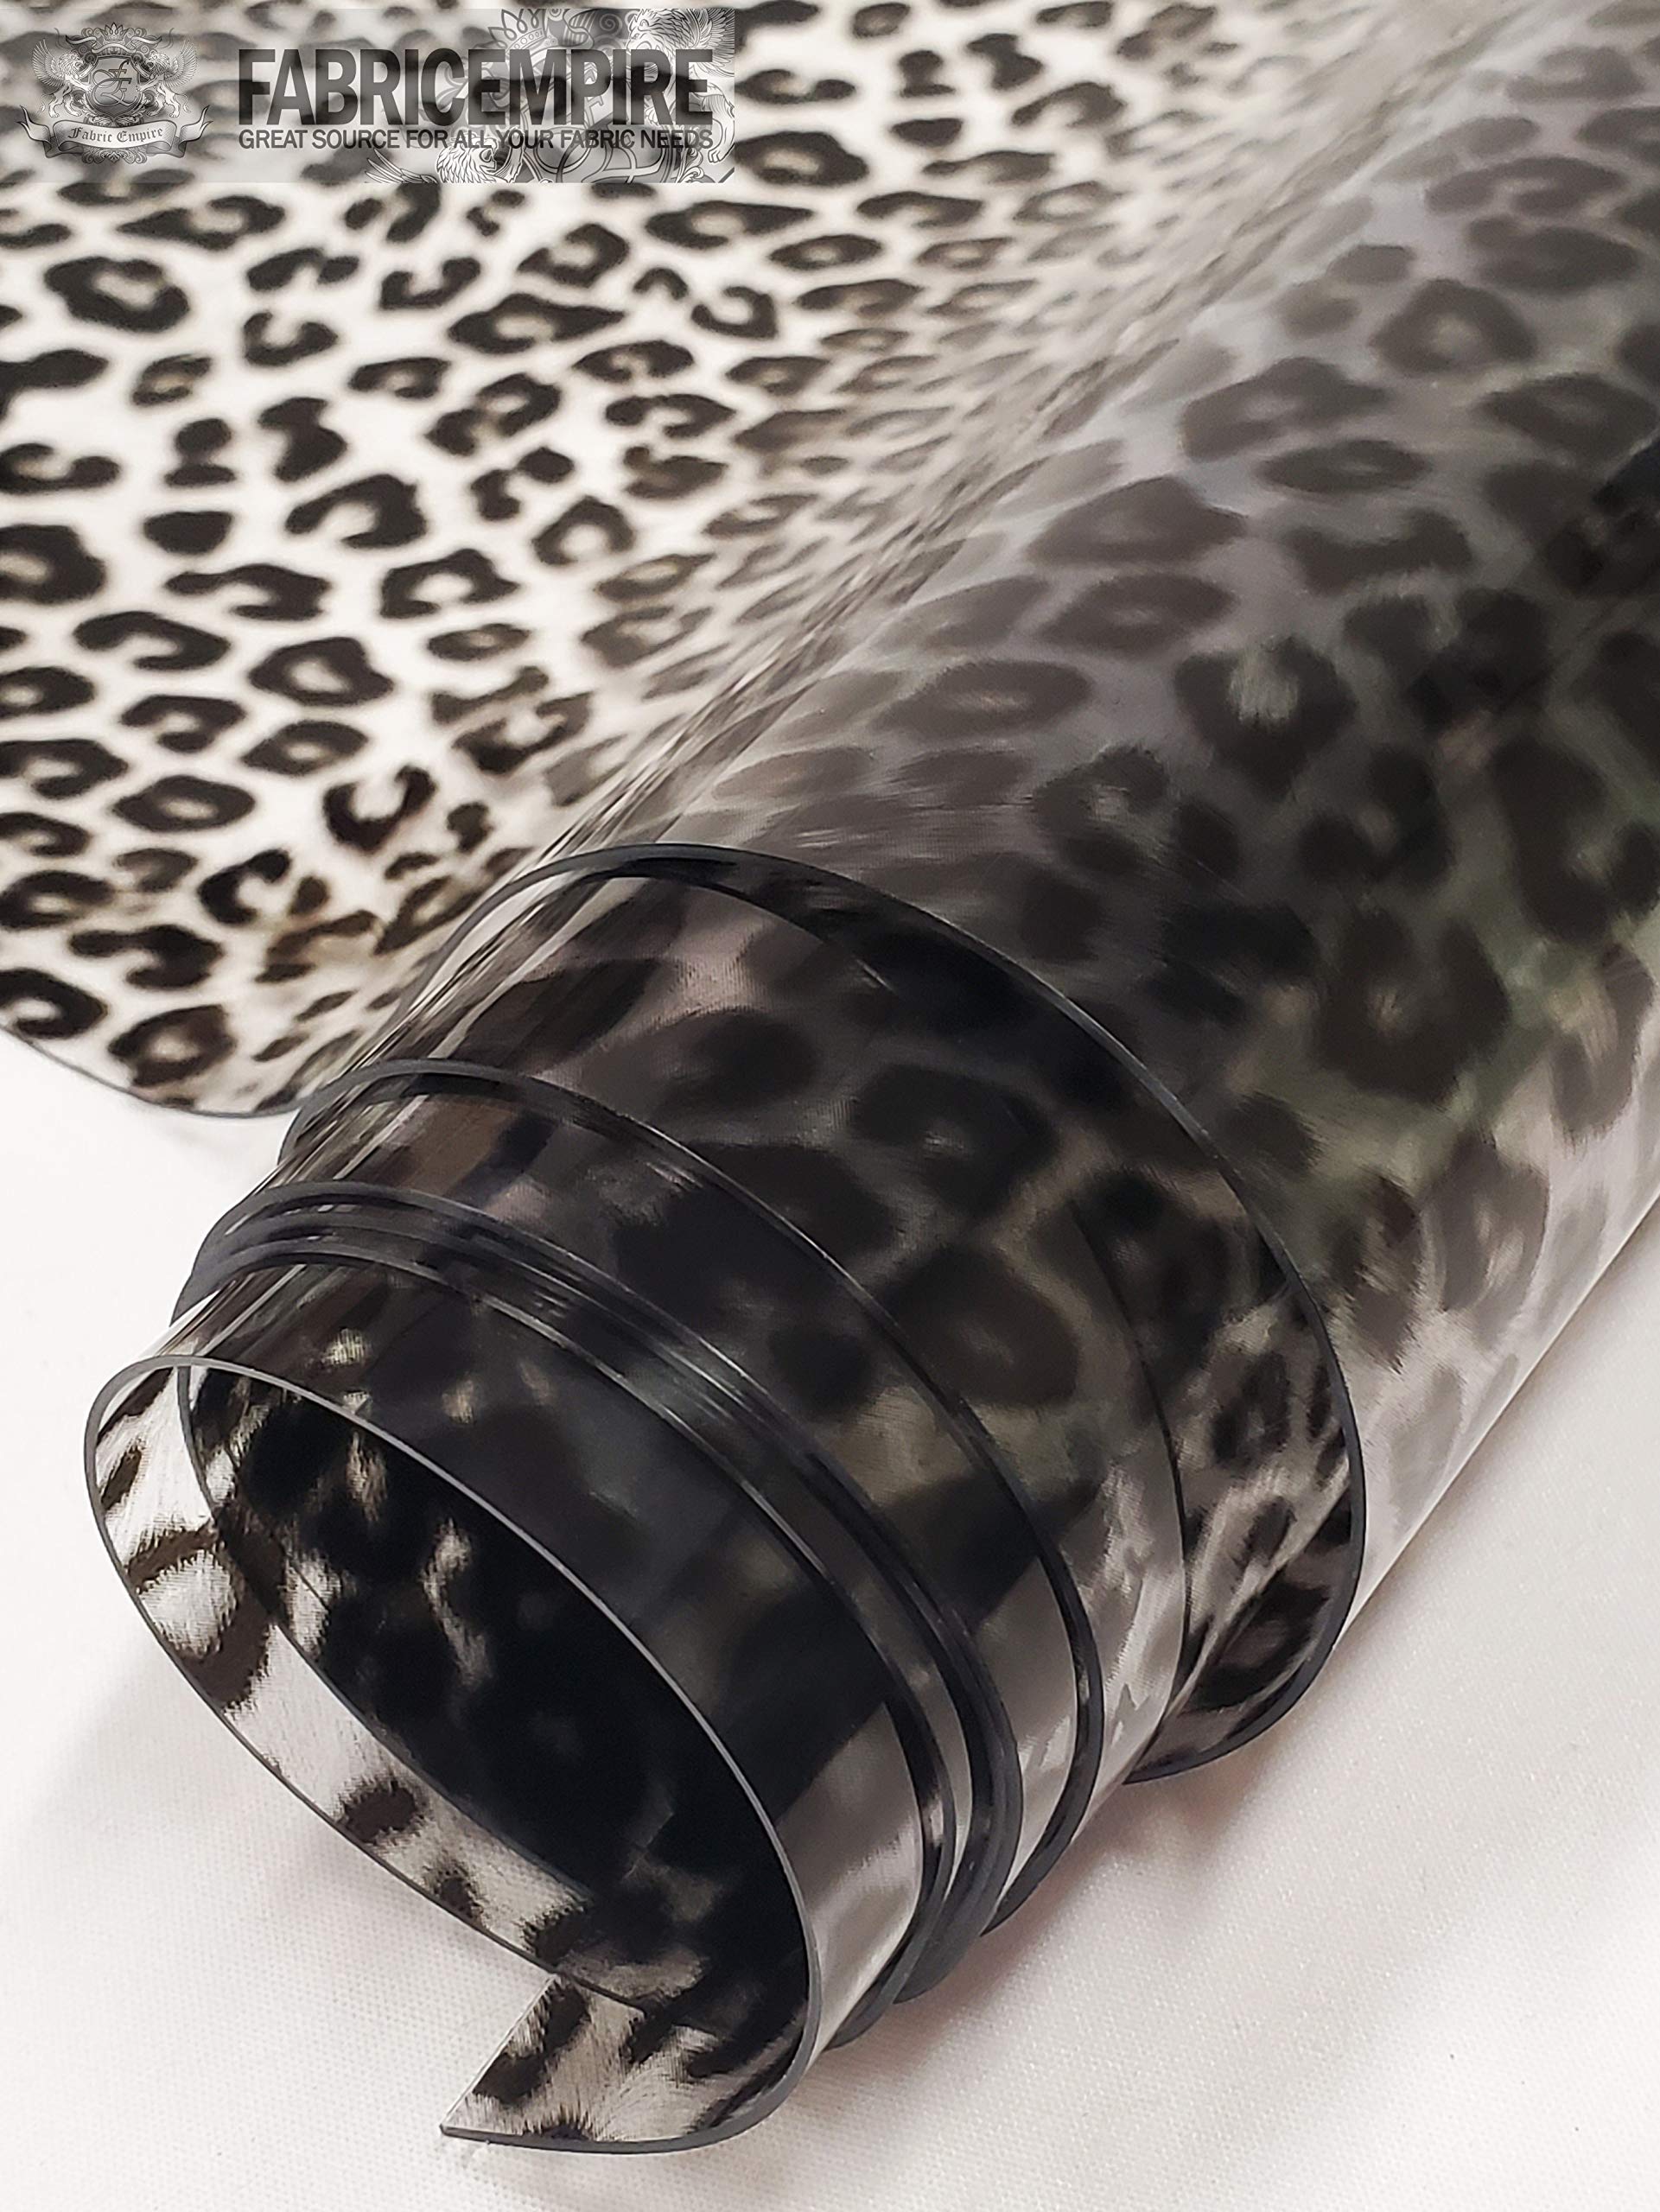 Transparent Leopard Animal Print Plastic Vinyl Upholstery Fabric / 30 Gauge / 54" Wide/Sold by The Yard (Clear)